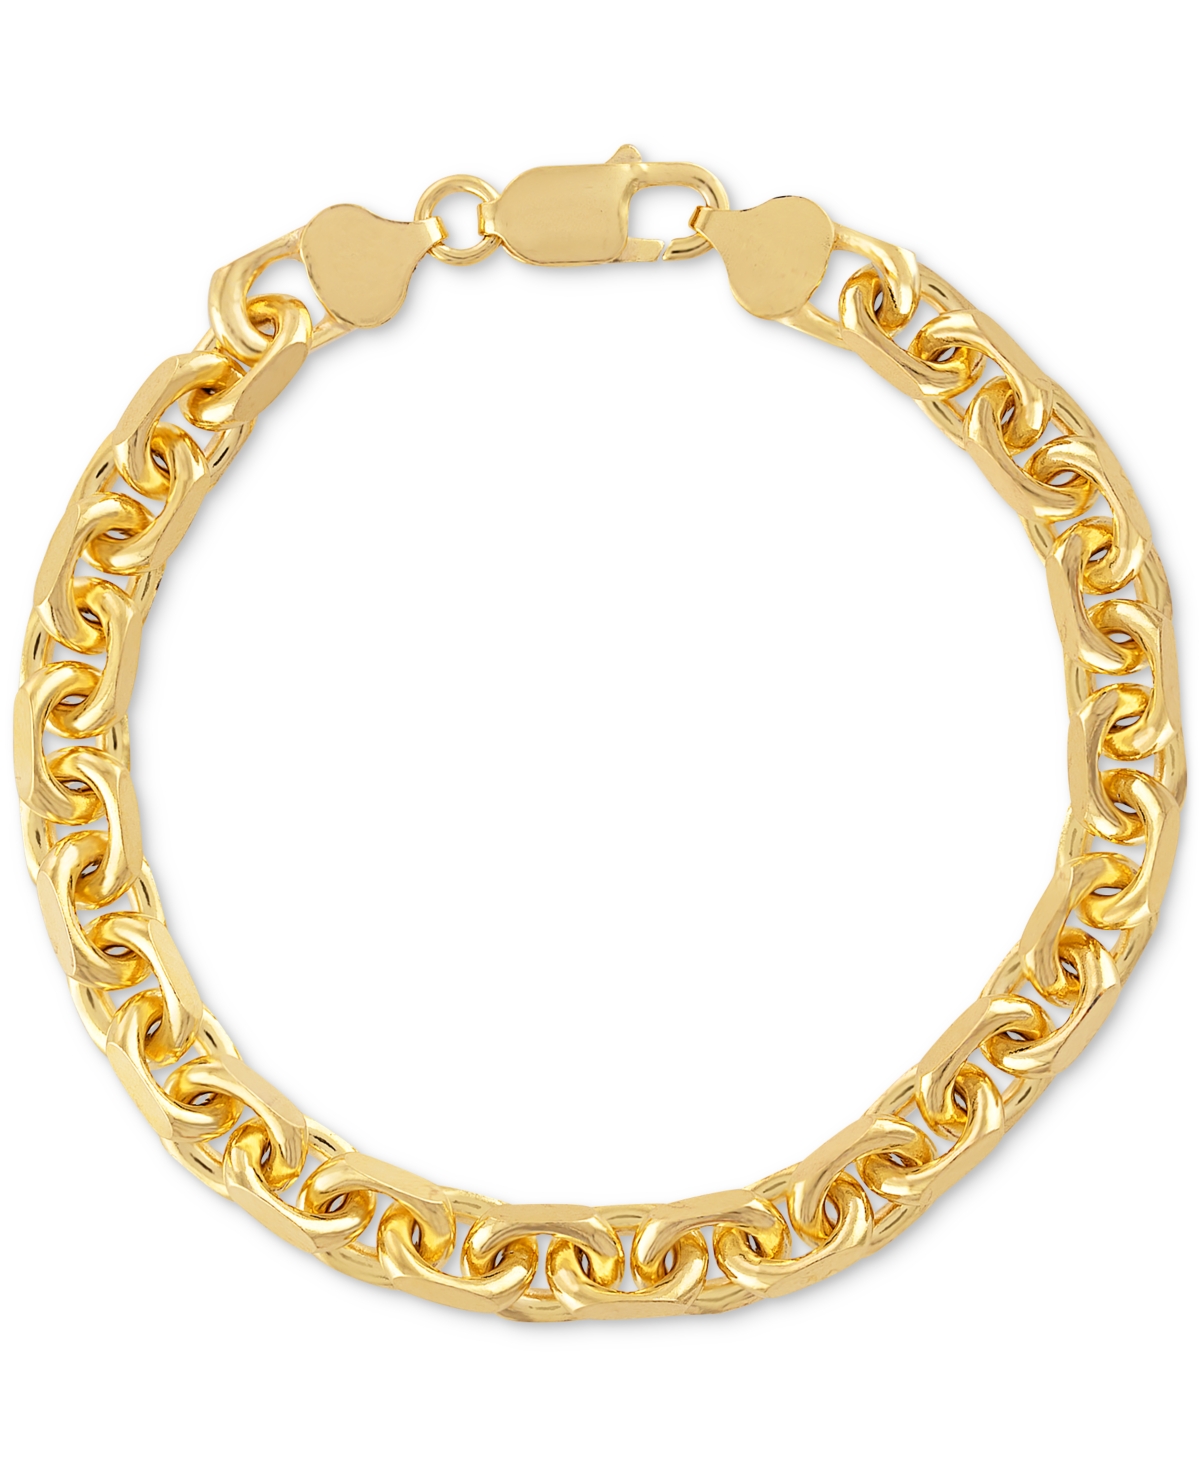 Esquire Men's Jewelry Cable Link Chain Bracelet, Created for Macy's